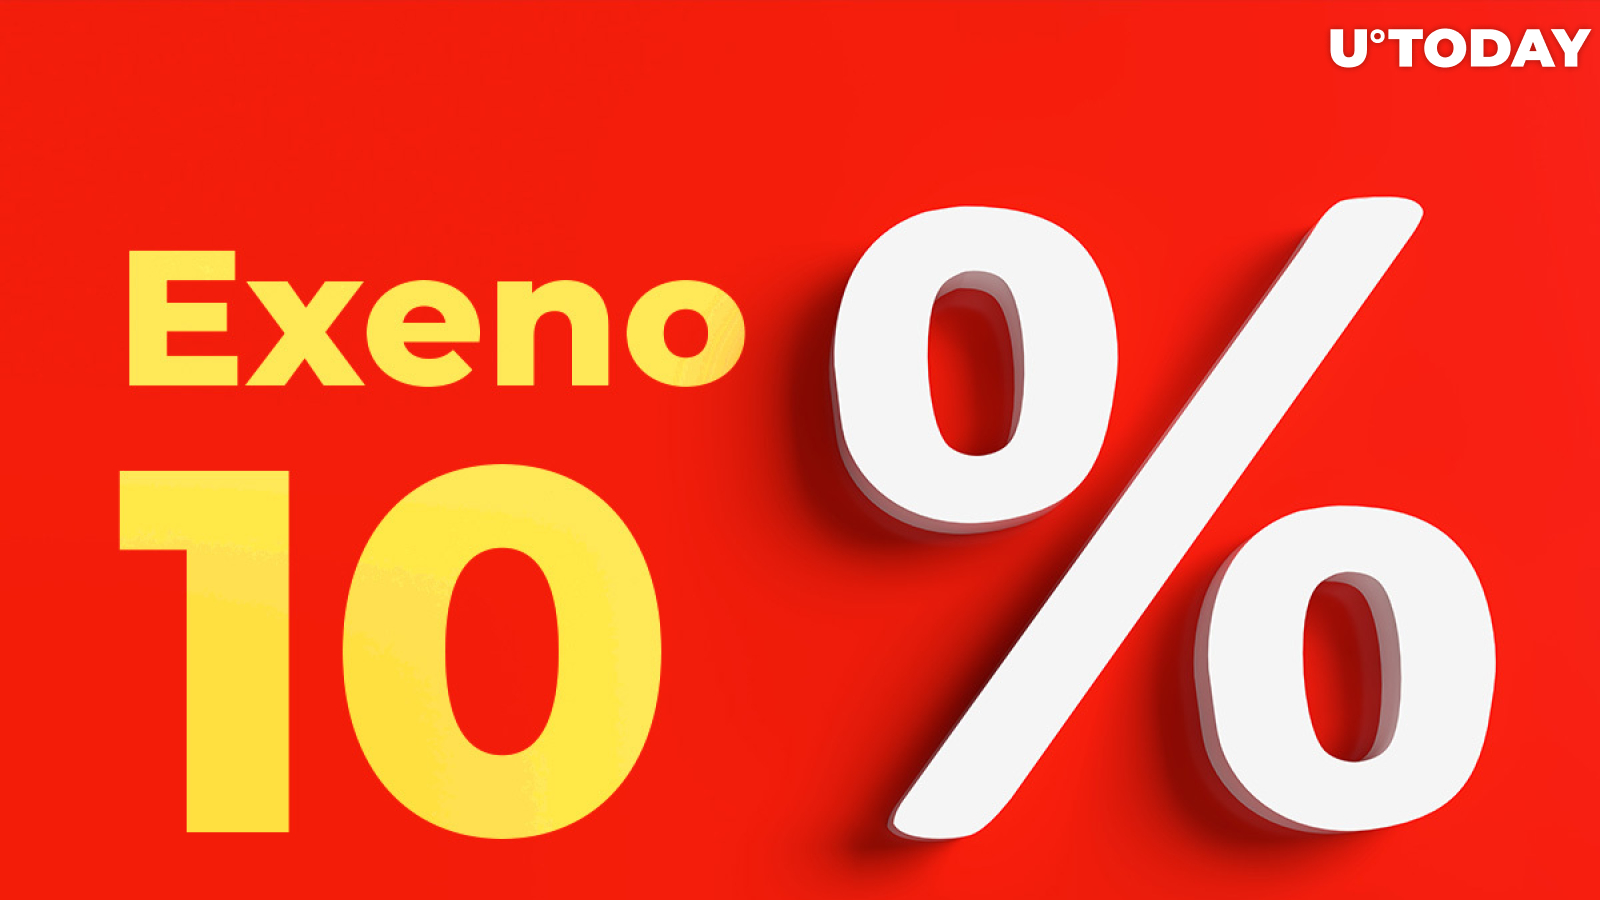 Are You a Hodler? Crypto-Friendly Exeno Announces Poll with 10% Discount for Participants